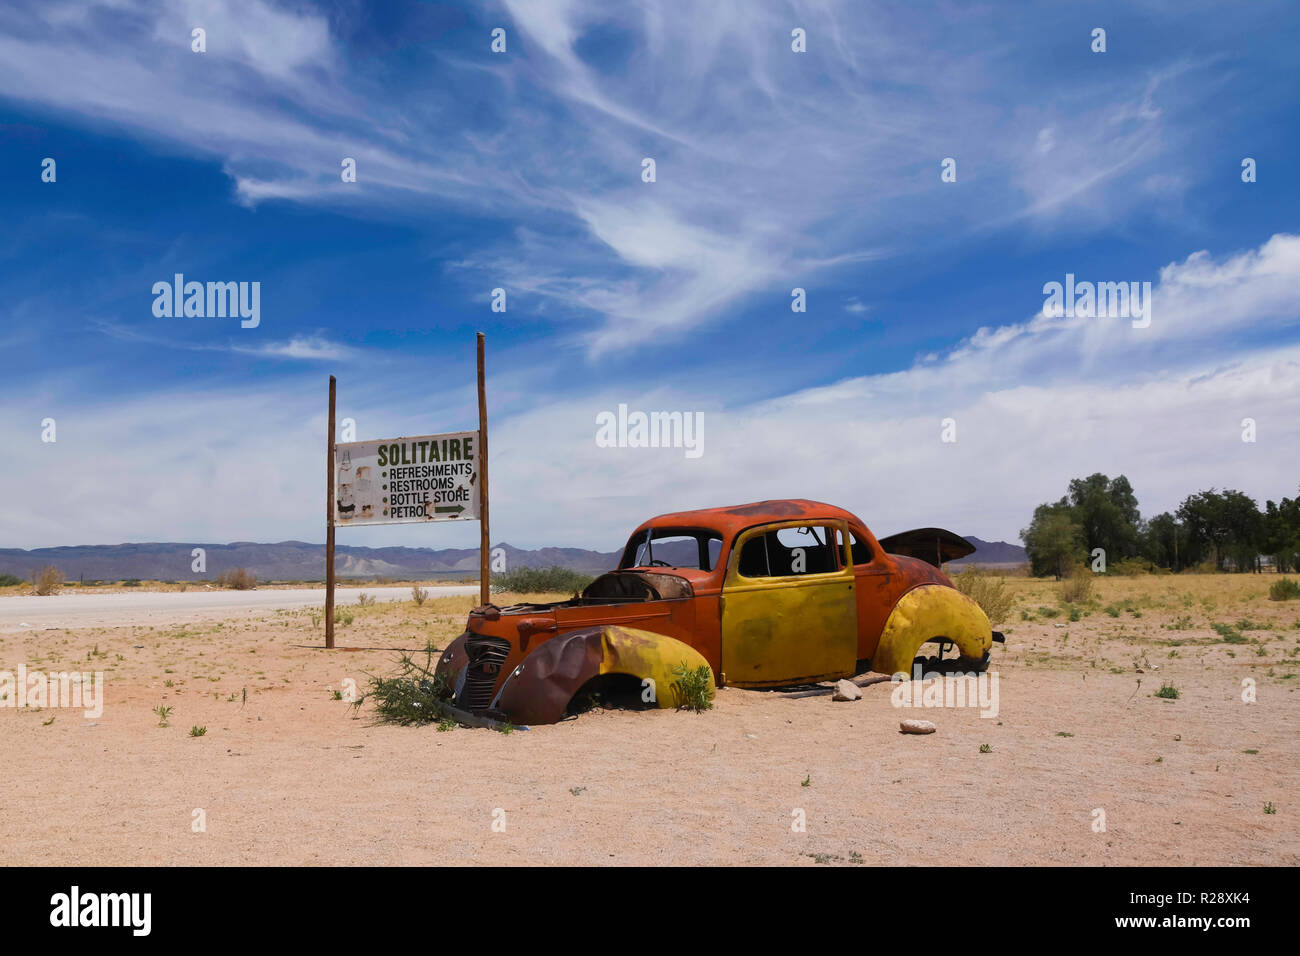 Wrecked cars lie abandoned in the desert surrounding Solitaire in Namibia. Stock Photo